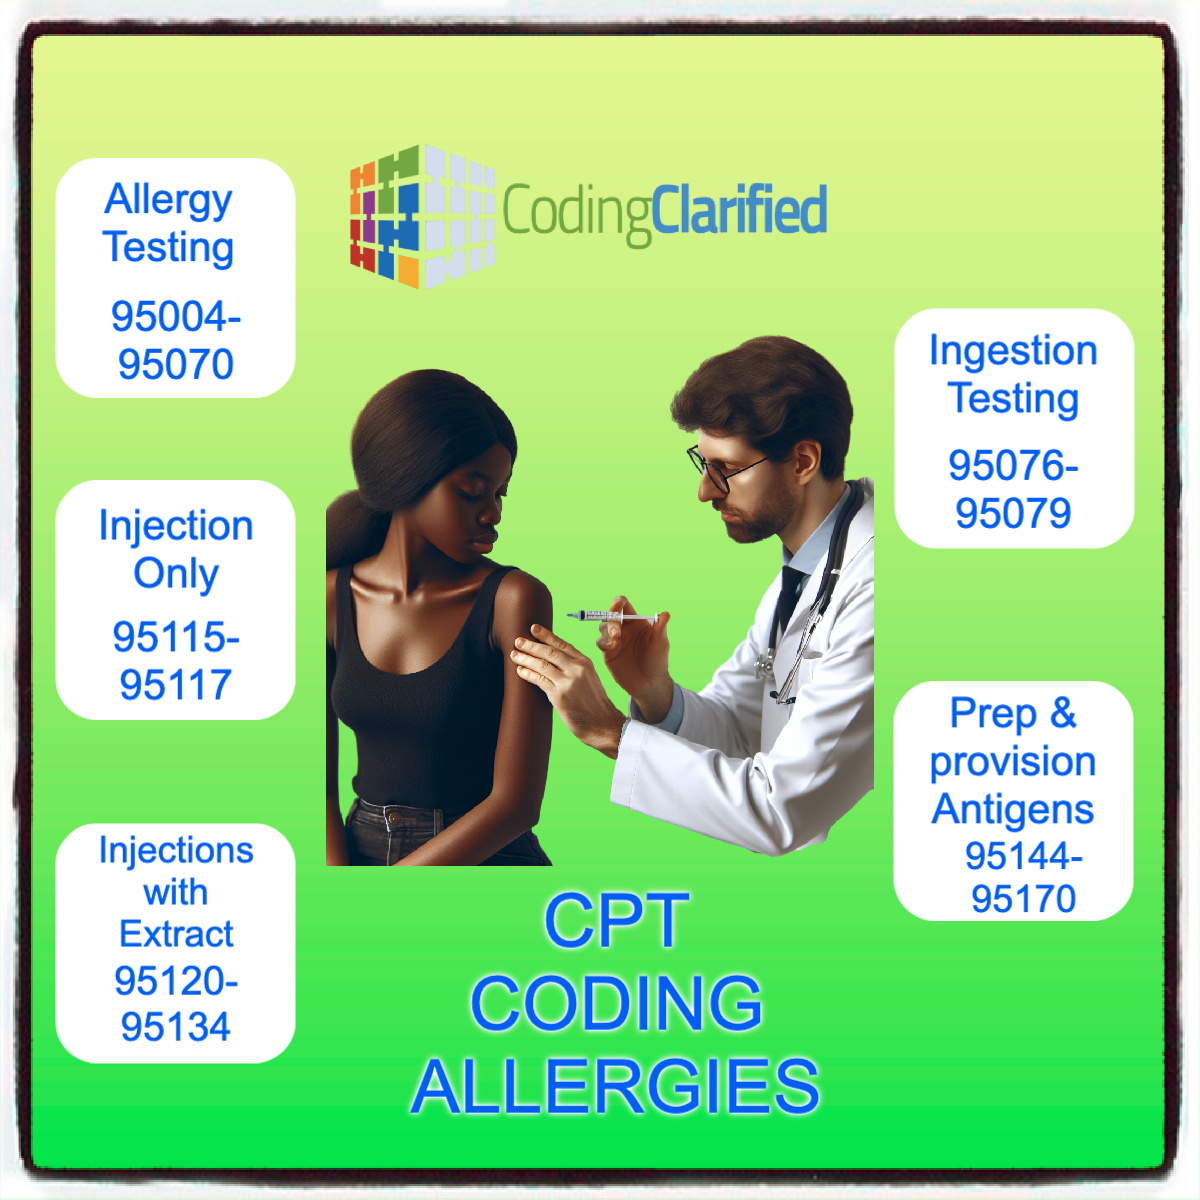 CPT Coding Allergies graphic showing common allergy codes and picture of doctor and women